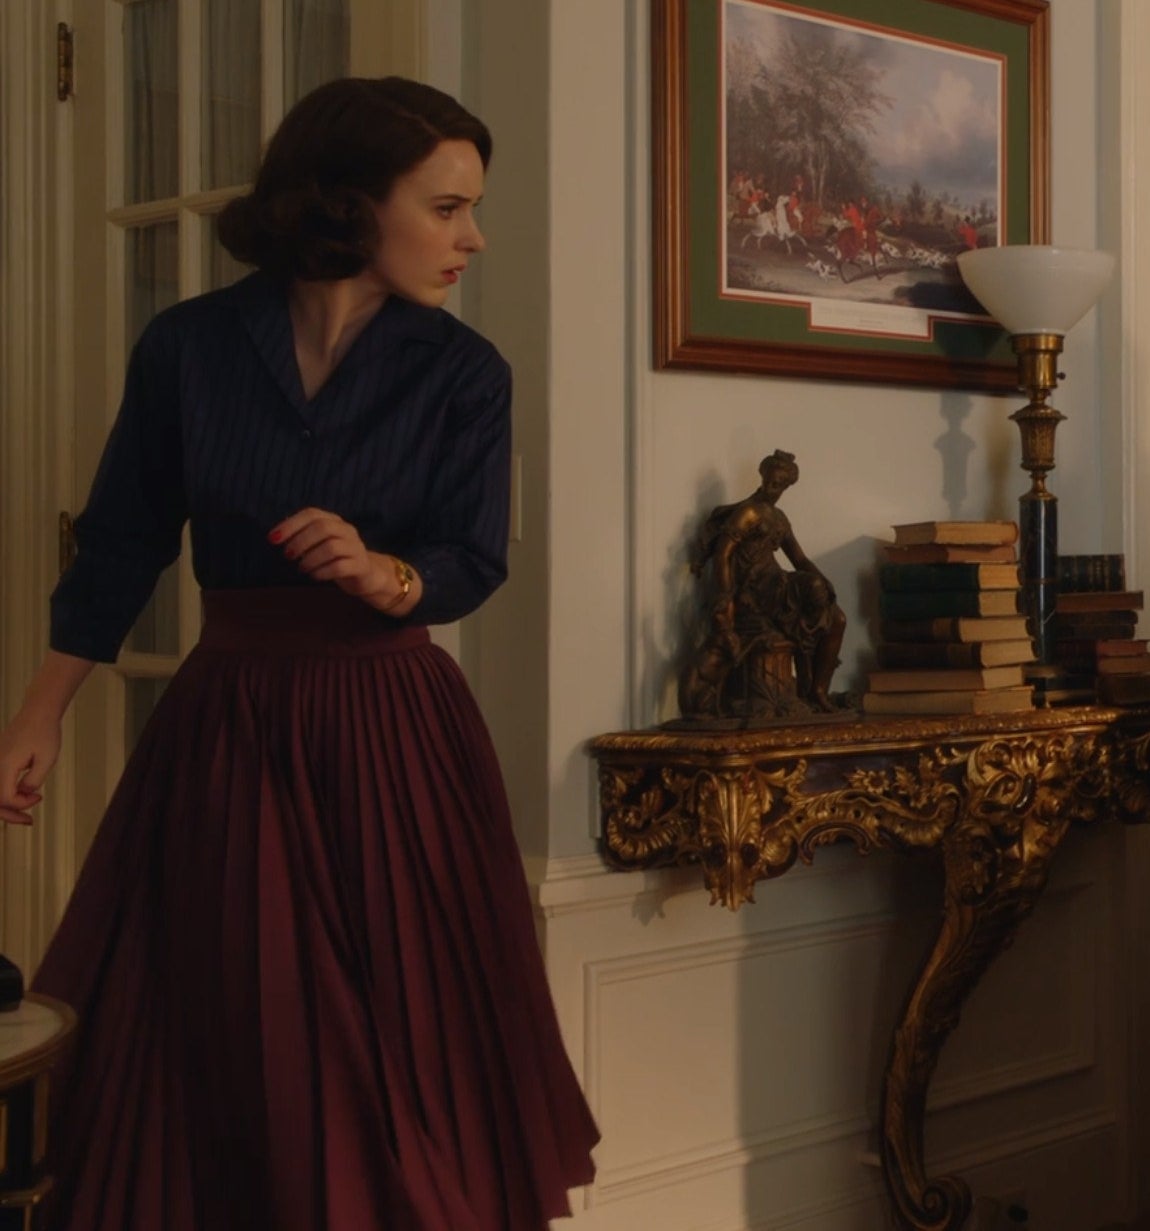 Screenshot from Mrs. Maisel shows Midge in a long skirt and button up shirt